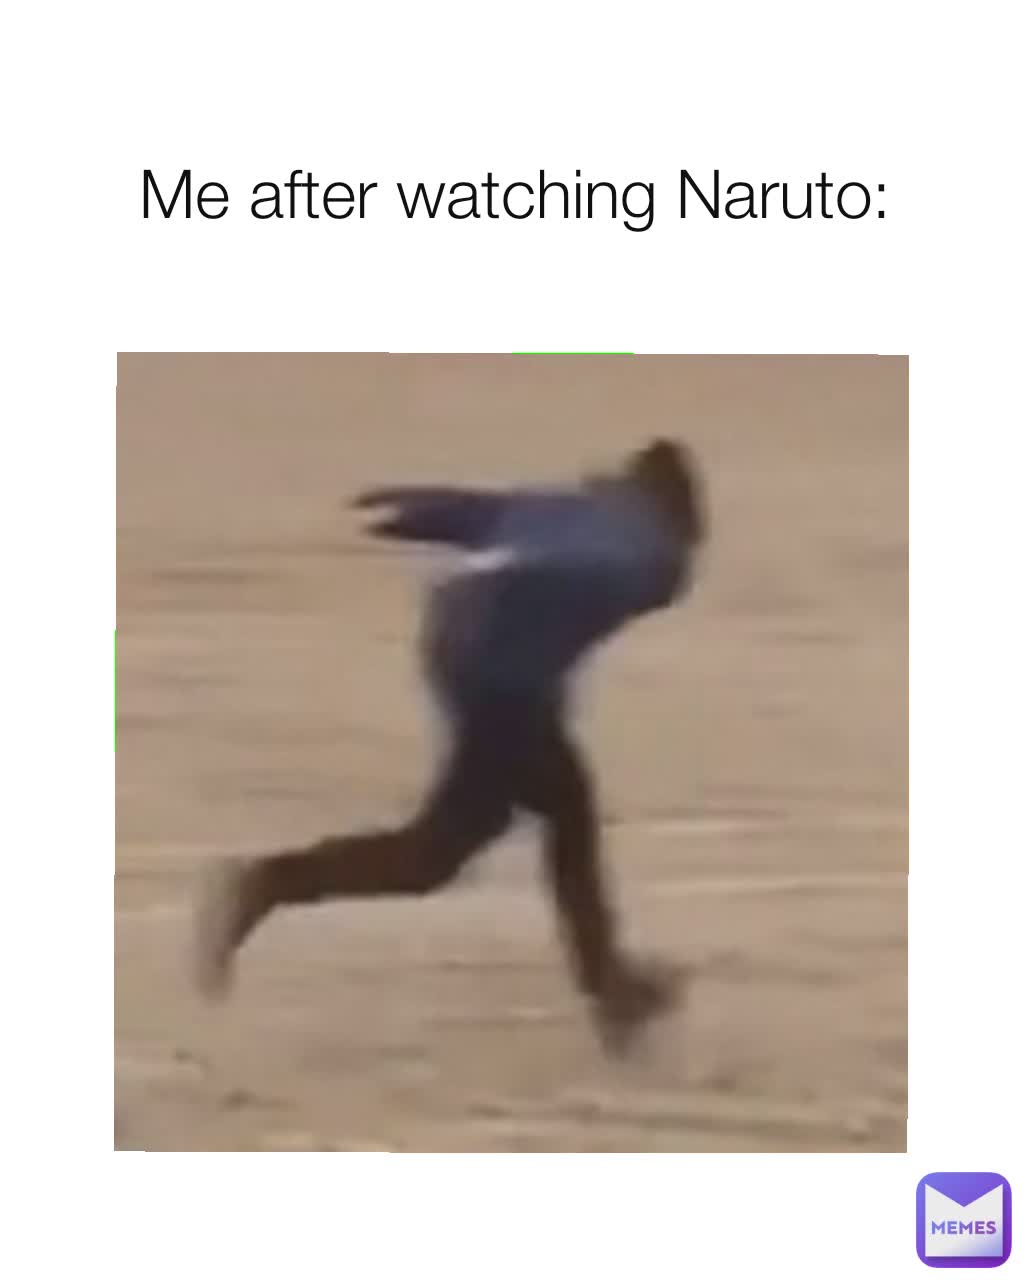 Me after watching Naruto: